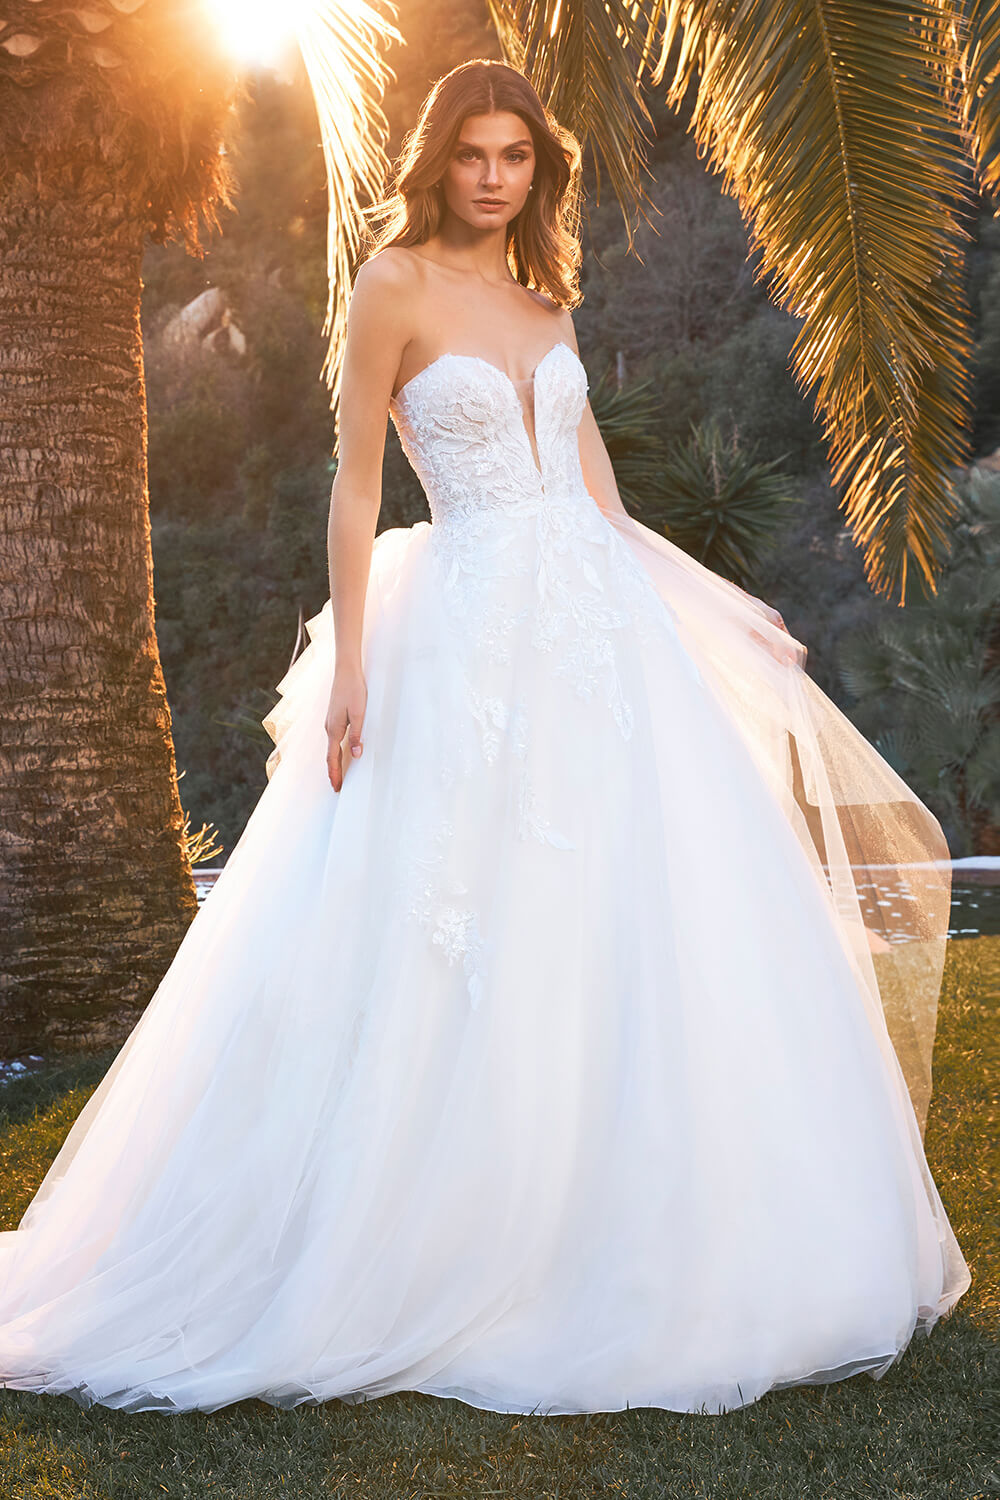 Floral Embroidered Tulle Ballgown with Deep-V Neckline and Open Back